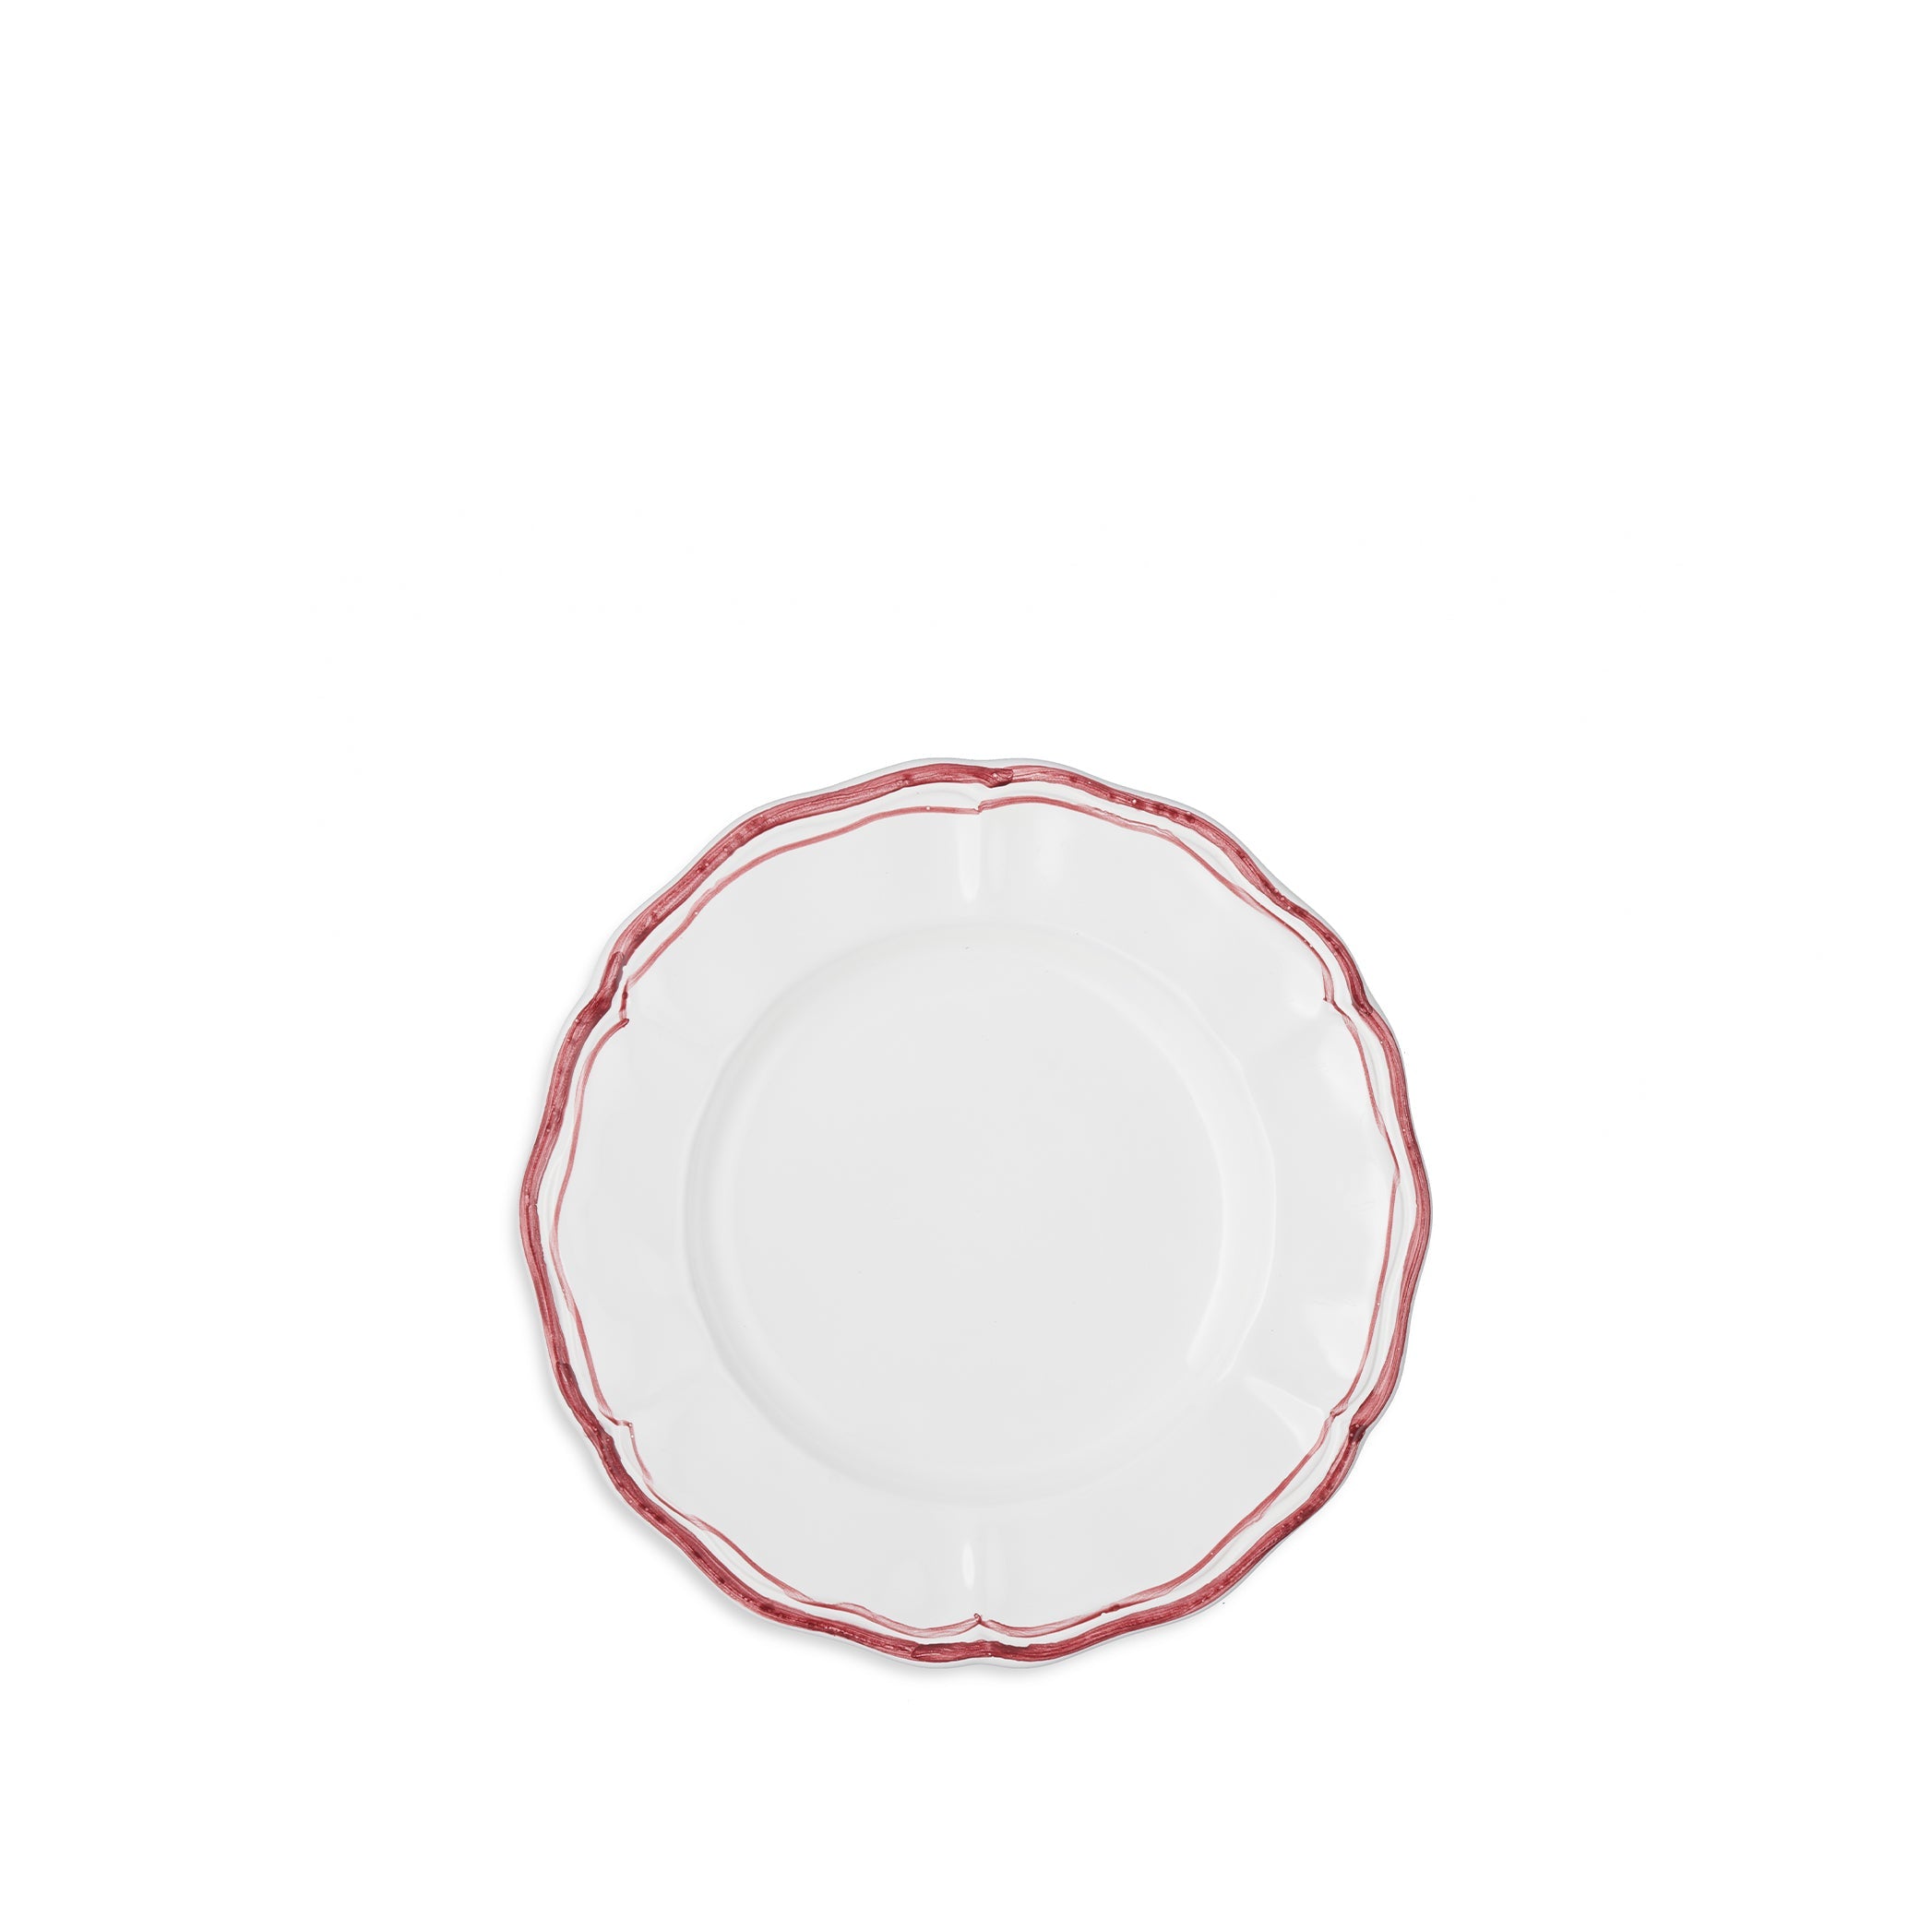 Scalloped Side Plate With Red Double Rim, 21cm